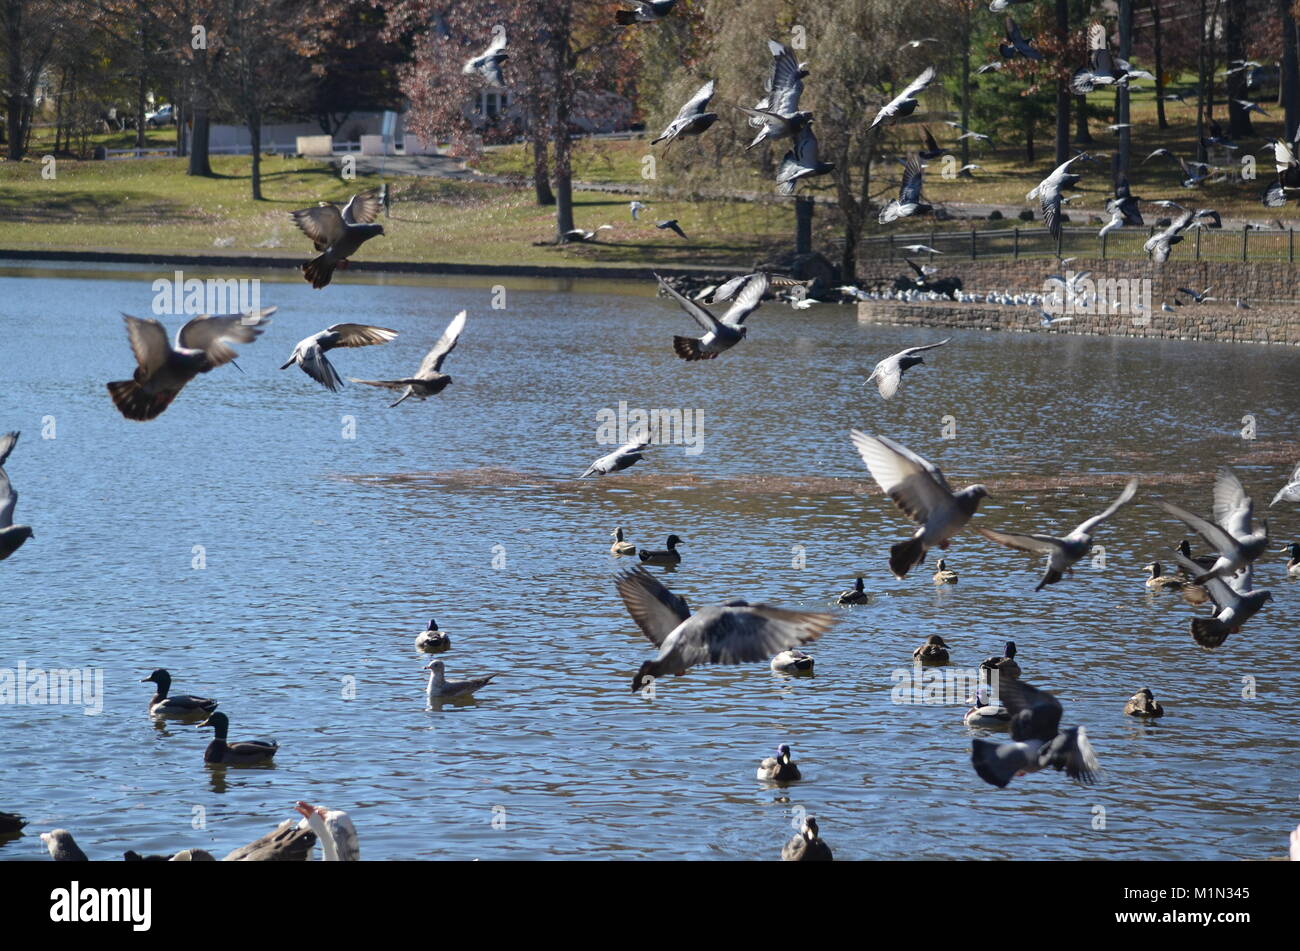 Colorful birds in flight over a pond Stock Photo